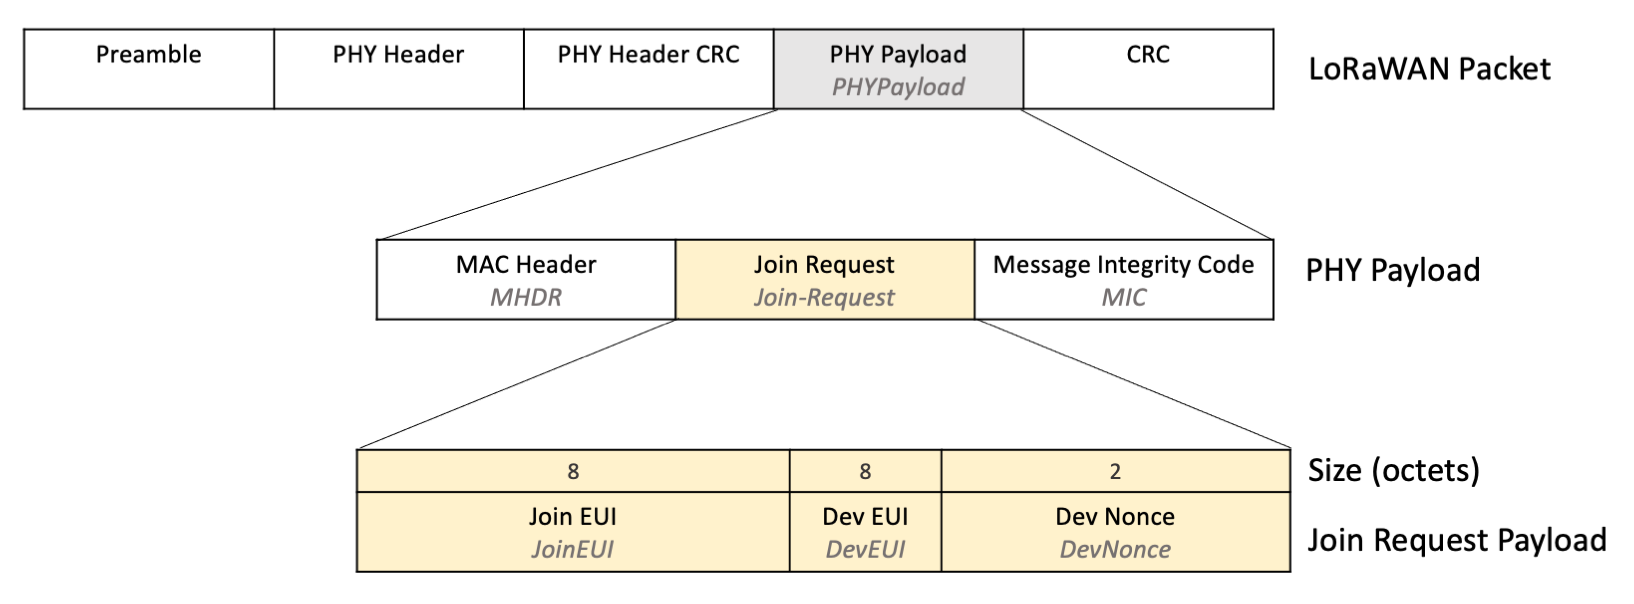 Join Request payload format showing Join EUI (8 octets), Dev EUI (8 octets), Dev Nonce (2 octets)